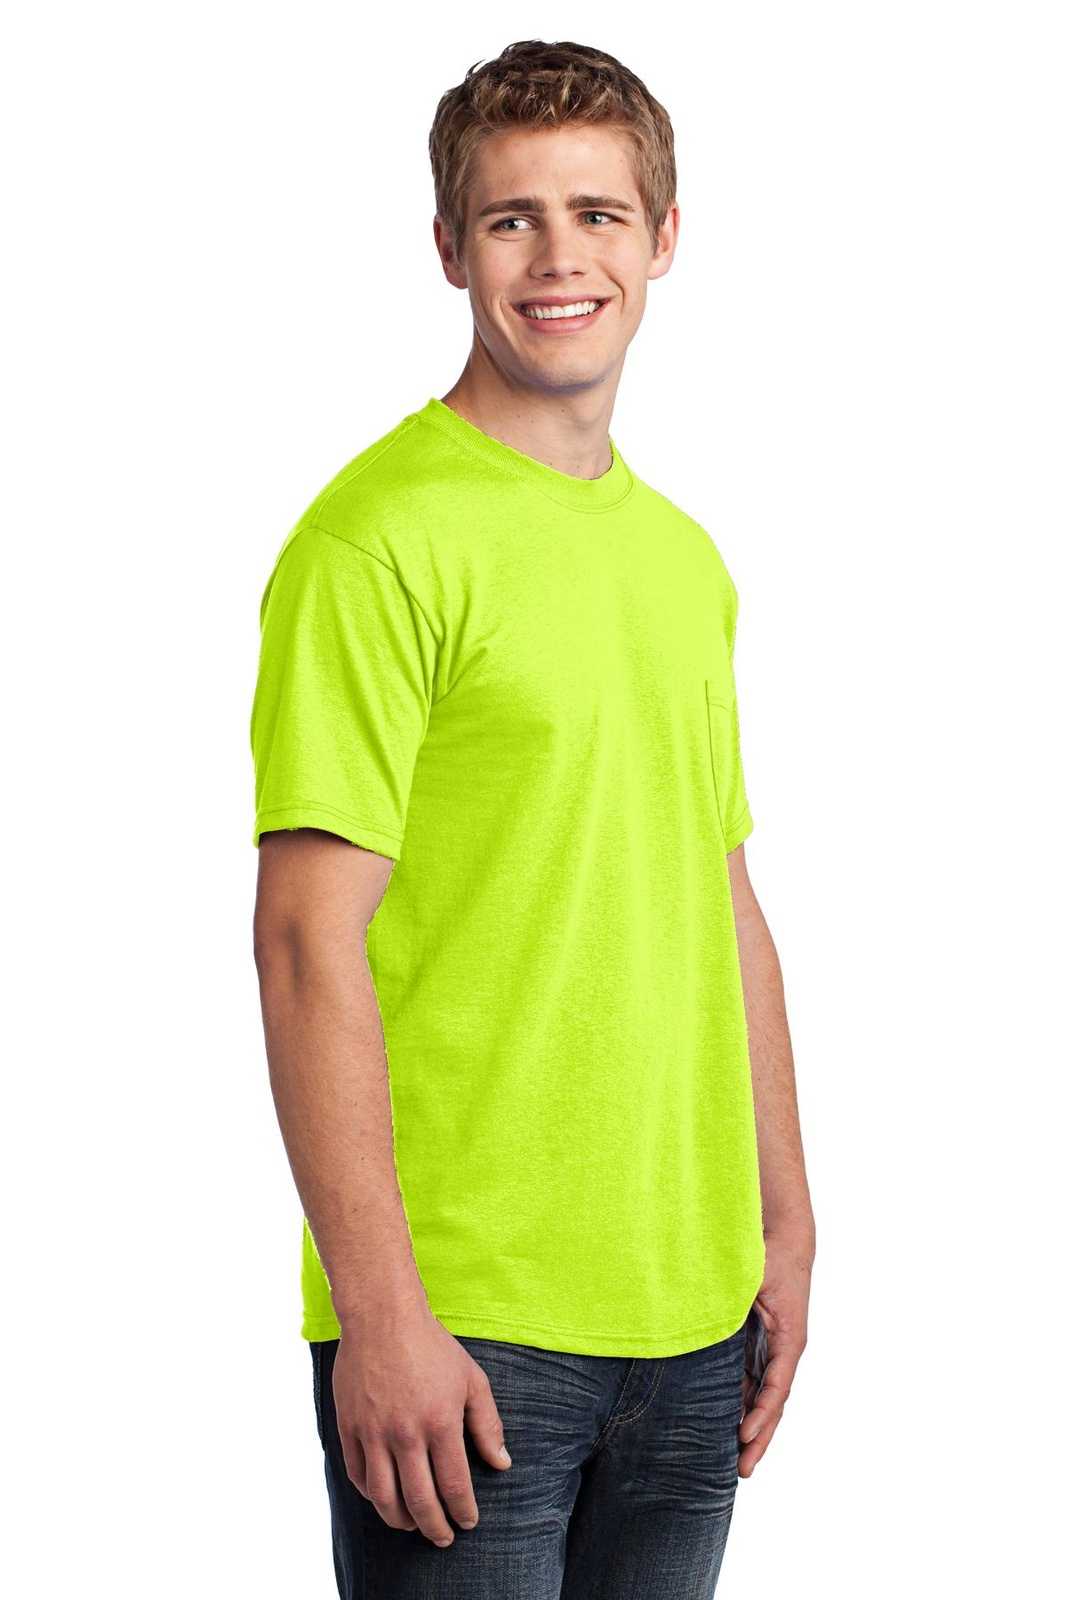 Port &amp; Company USA100P All-American Pocket Tee - Safety Green - HIT a Double - 4